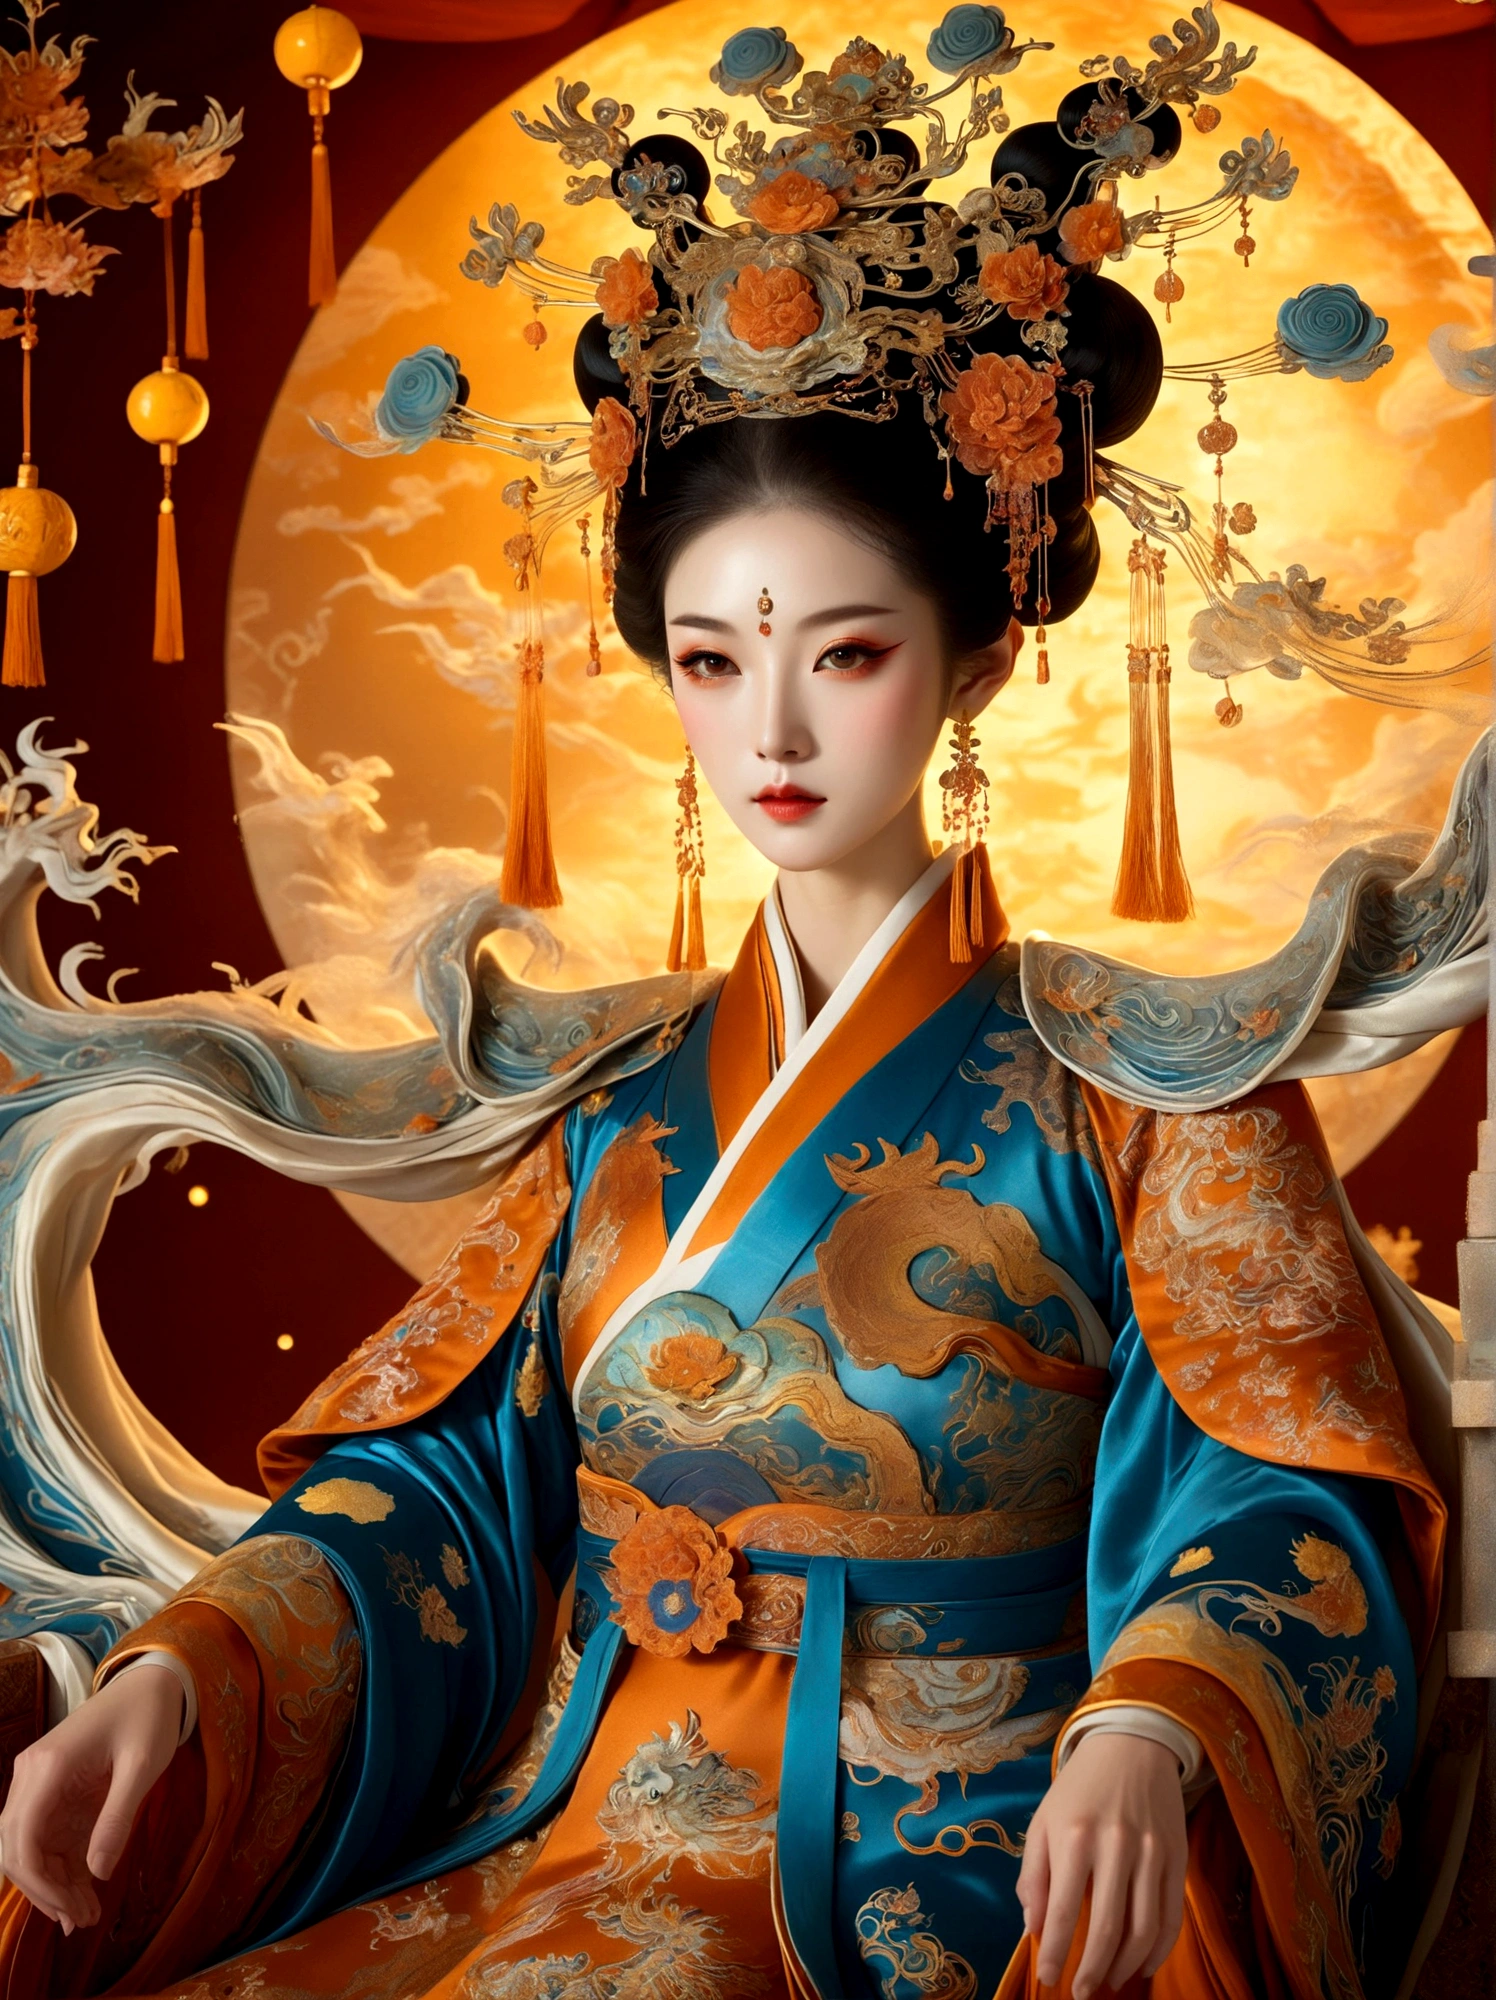 (Chinese Tang Dynasty Empress:1.3)，A royal figure in a lavish robe, adorned with a large crown, is seated on a throne, The setting is otherworldly and surreal, located in the vast expanse of space, The figure is perched on a miniature planet that's enveloped entirely by the rich fabric of the robe, reflecting an element of royal extravagance